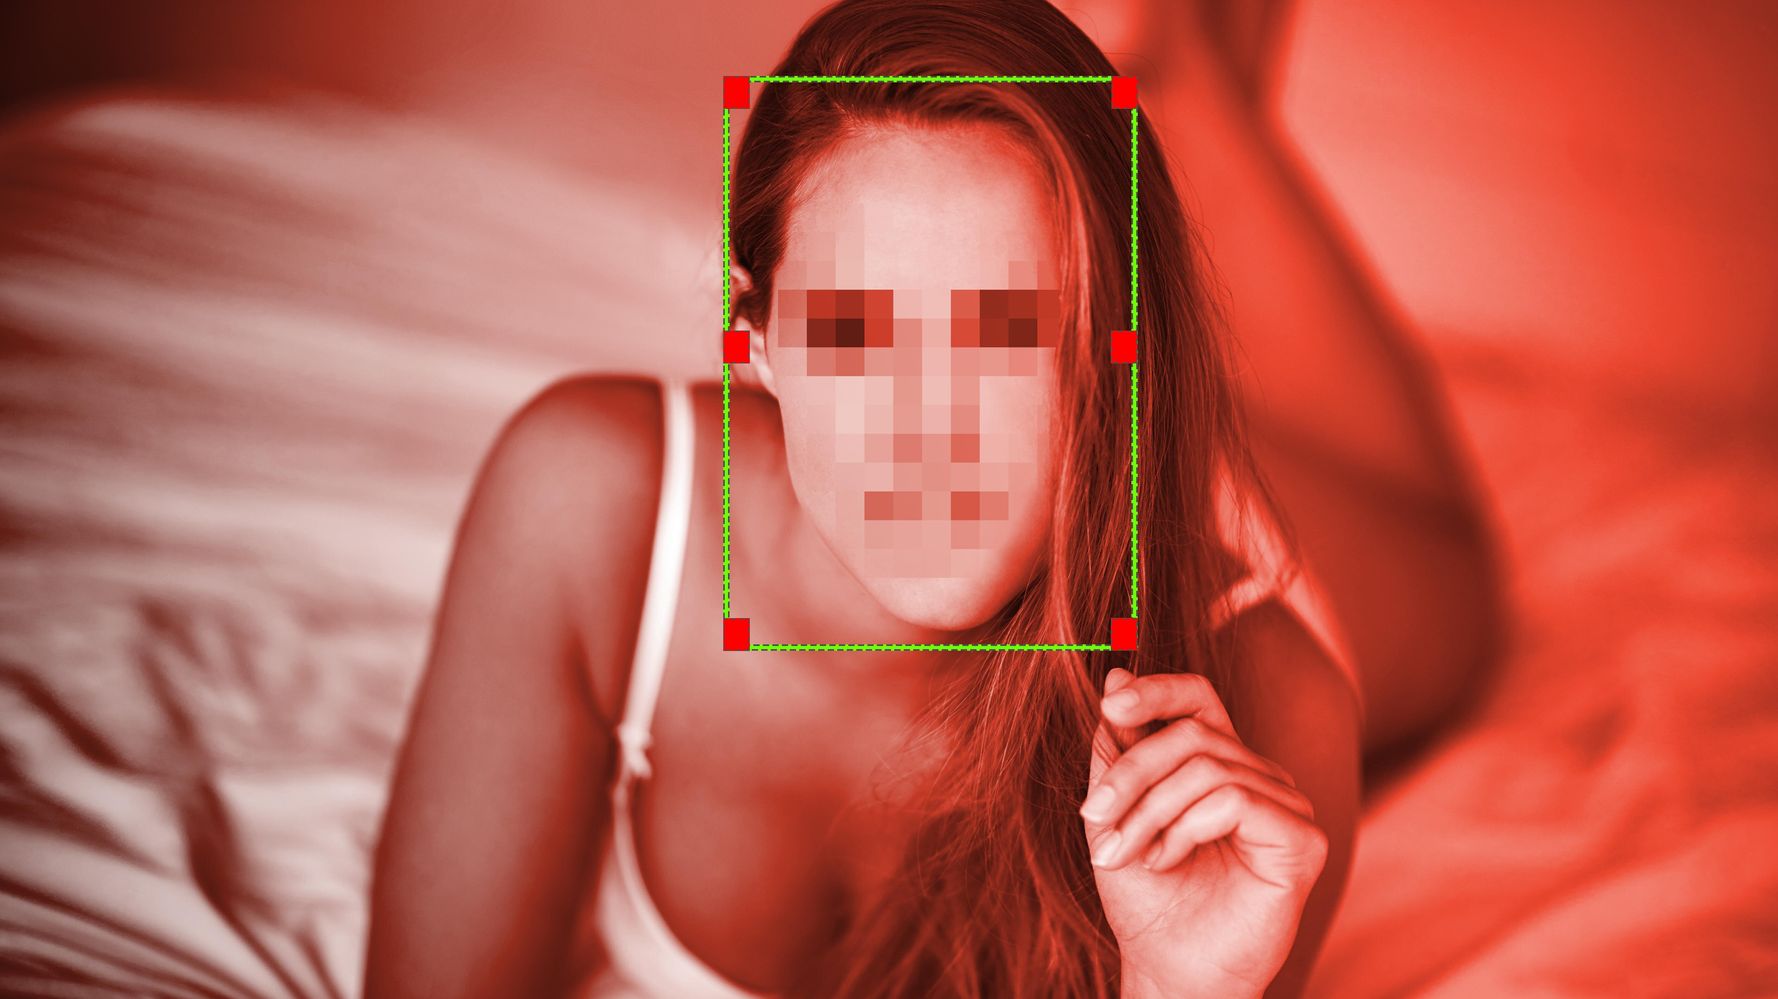 Beautiful Pornography Photography - Here's What It's Like To See Yourself In A Deepfake Porn ...